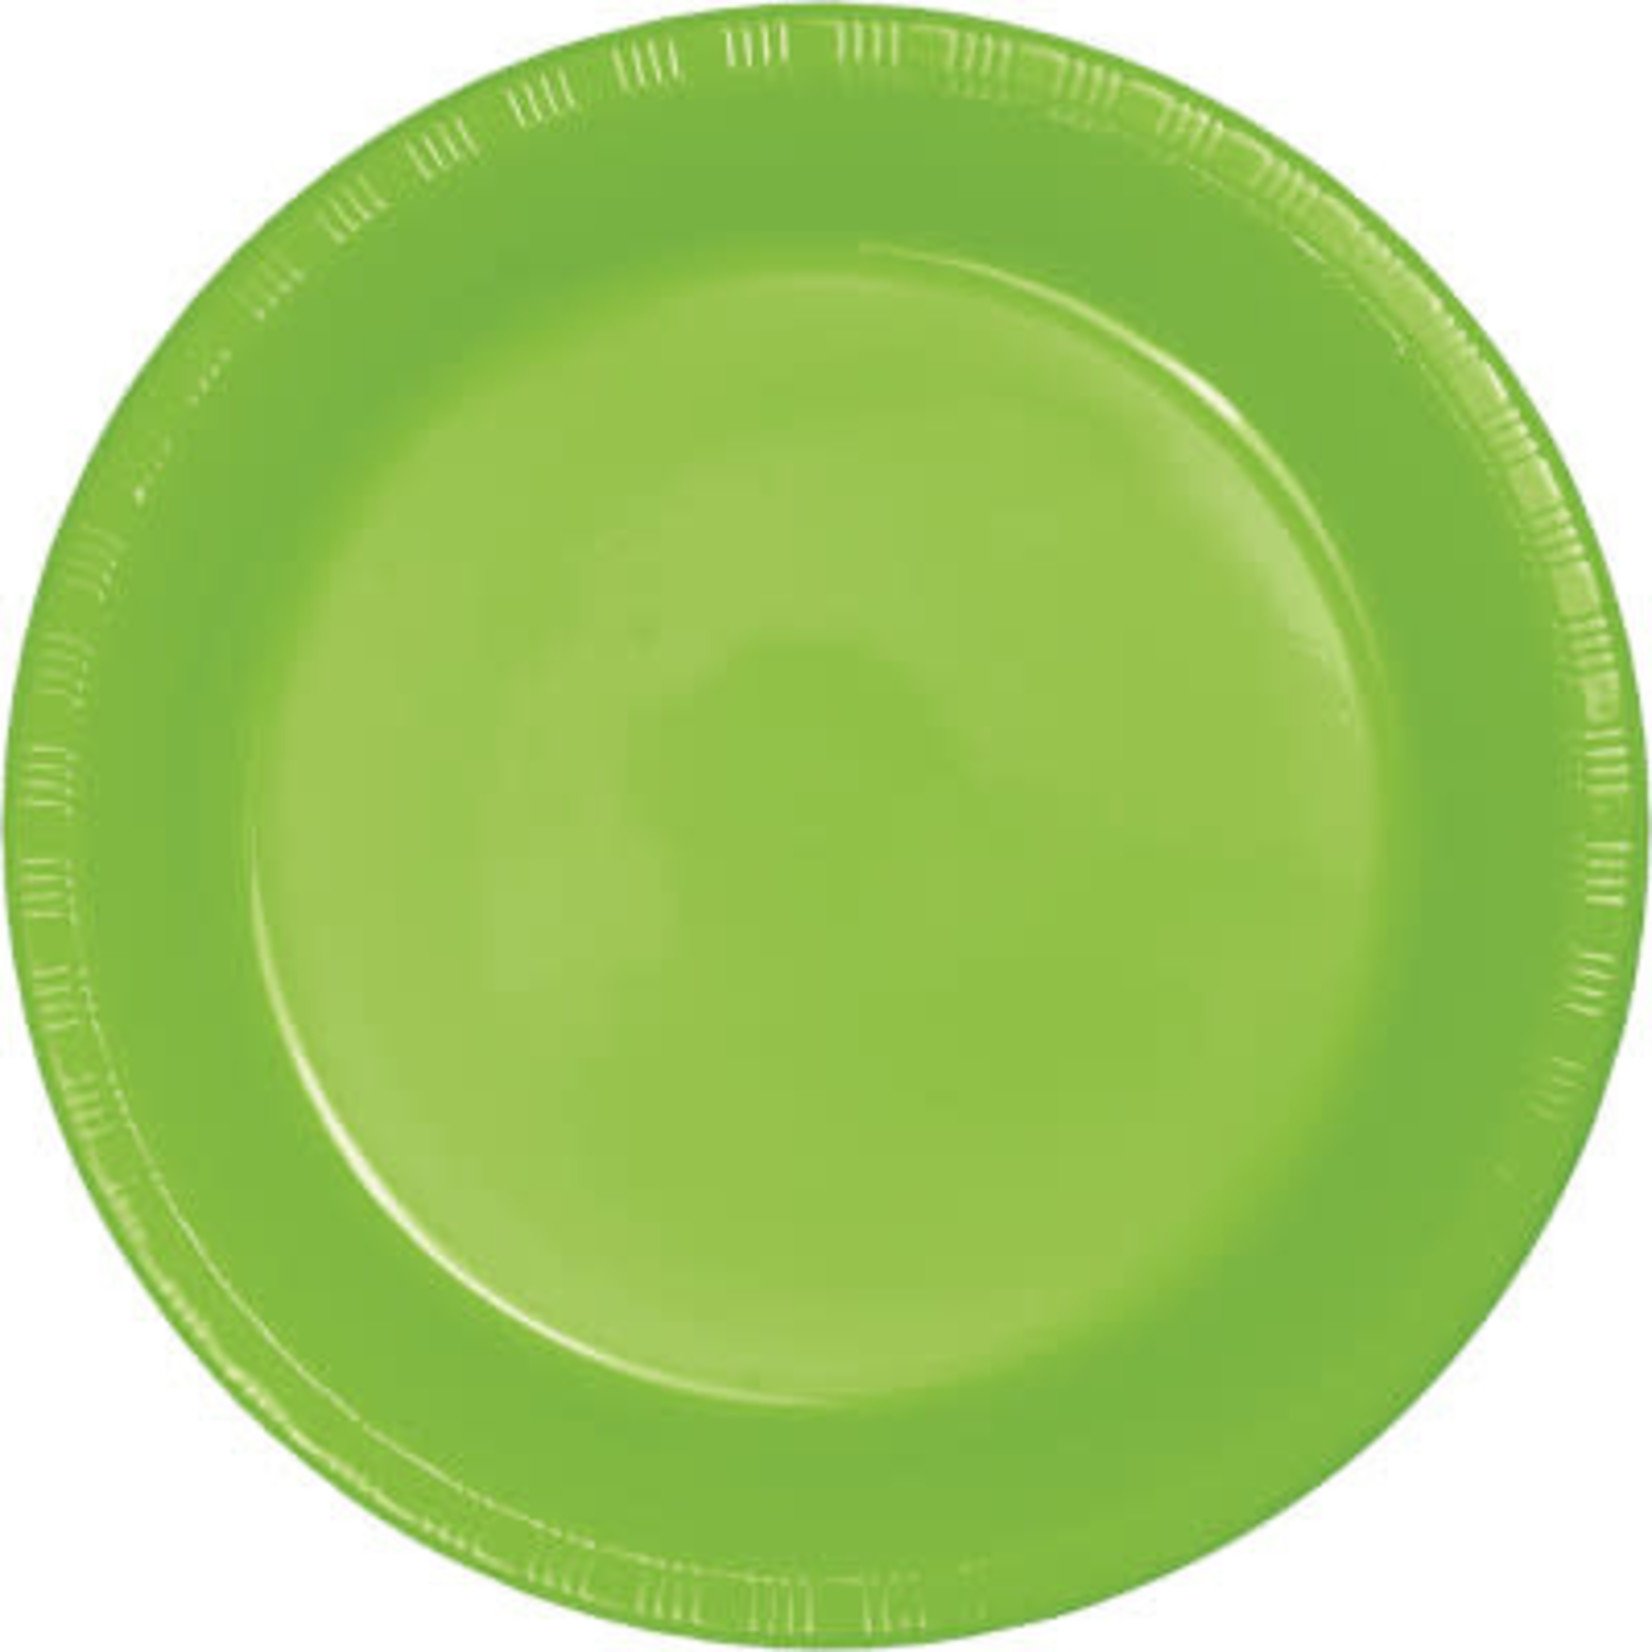 Touch of Color 10" Lime Green Plastic Banquet Plates - 24ct.